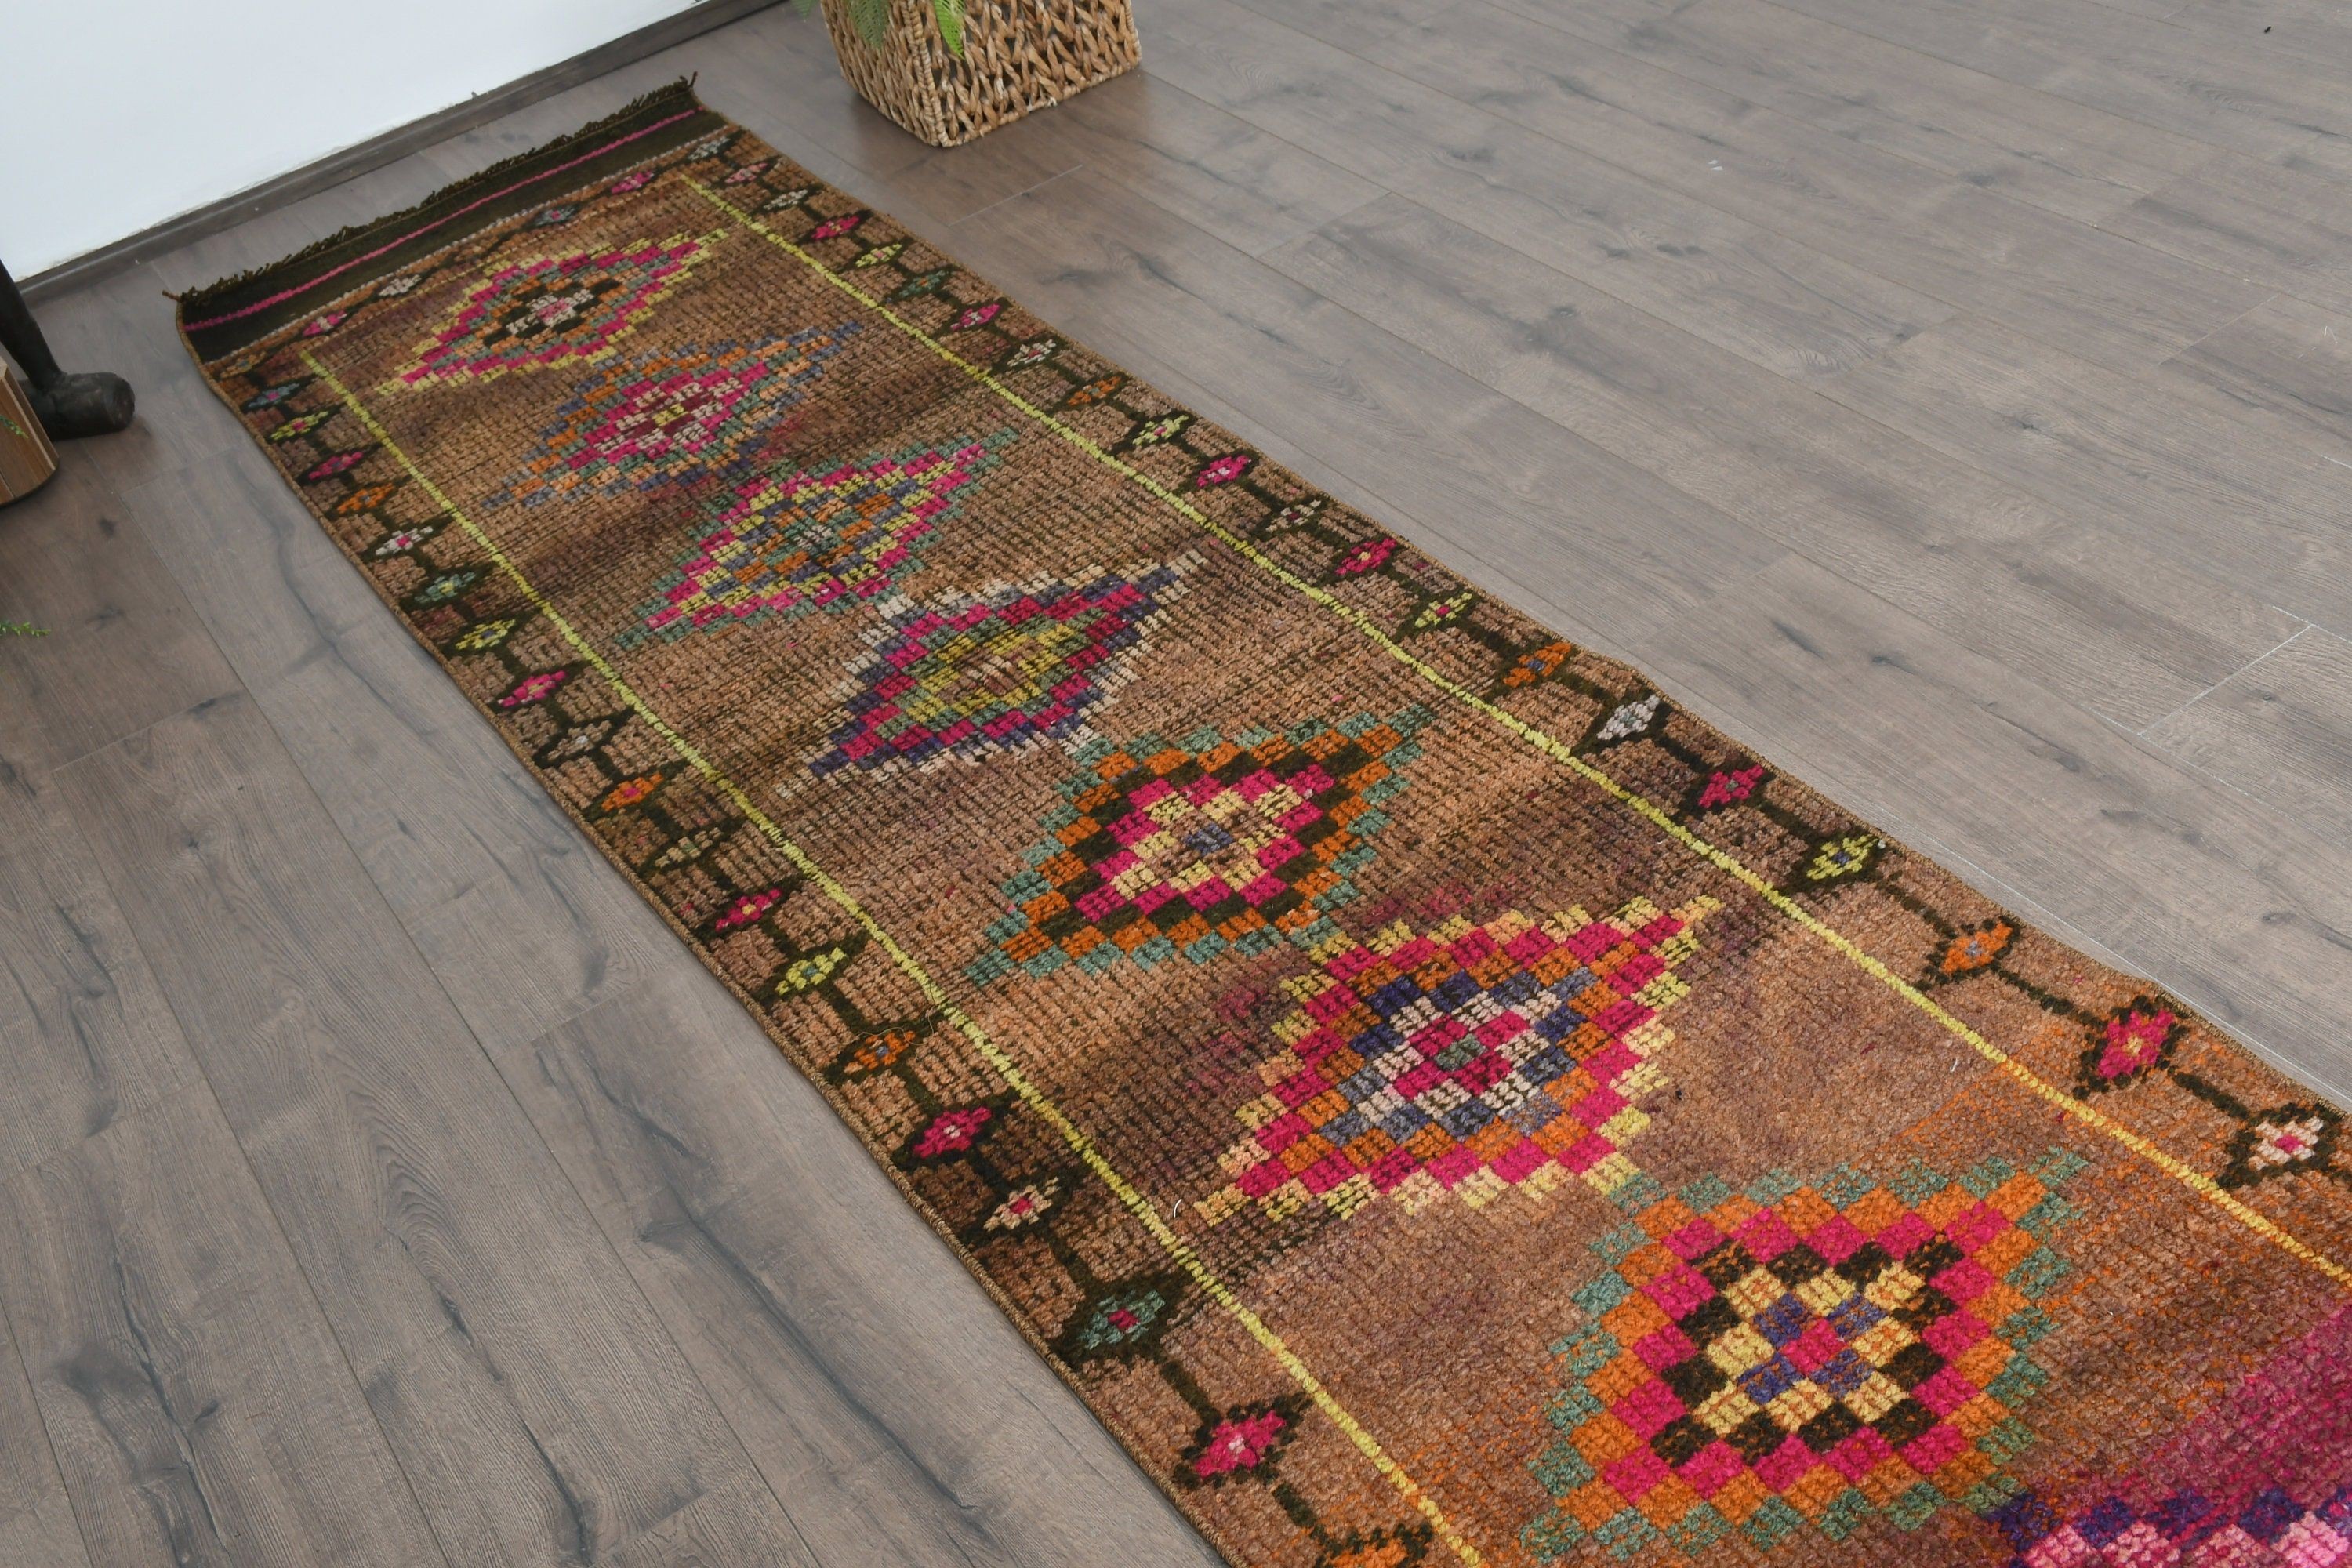 Cool Rug, Turkish Rug, Kitchen Rug, Authentic Rugs, Antique Rug, Brown  2.4x10.5 ft Runner Rug, Rugs for Stair, Vintage Rug